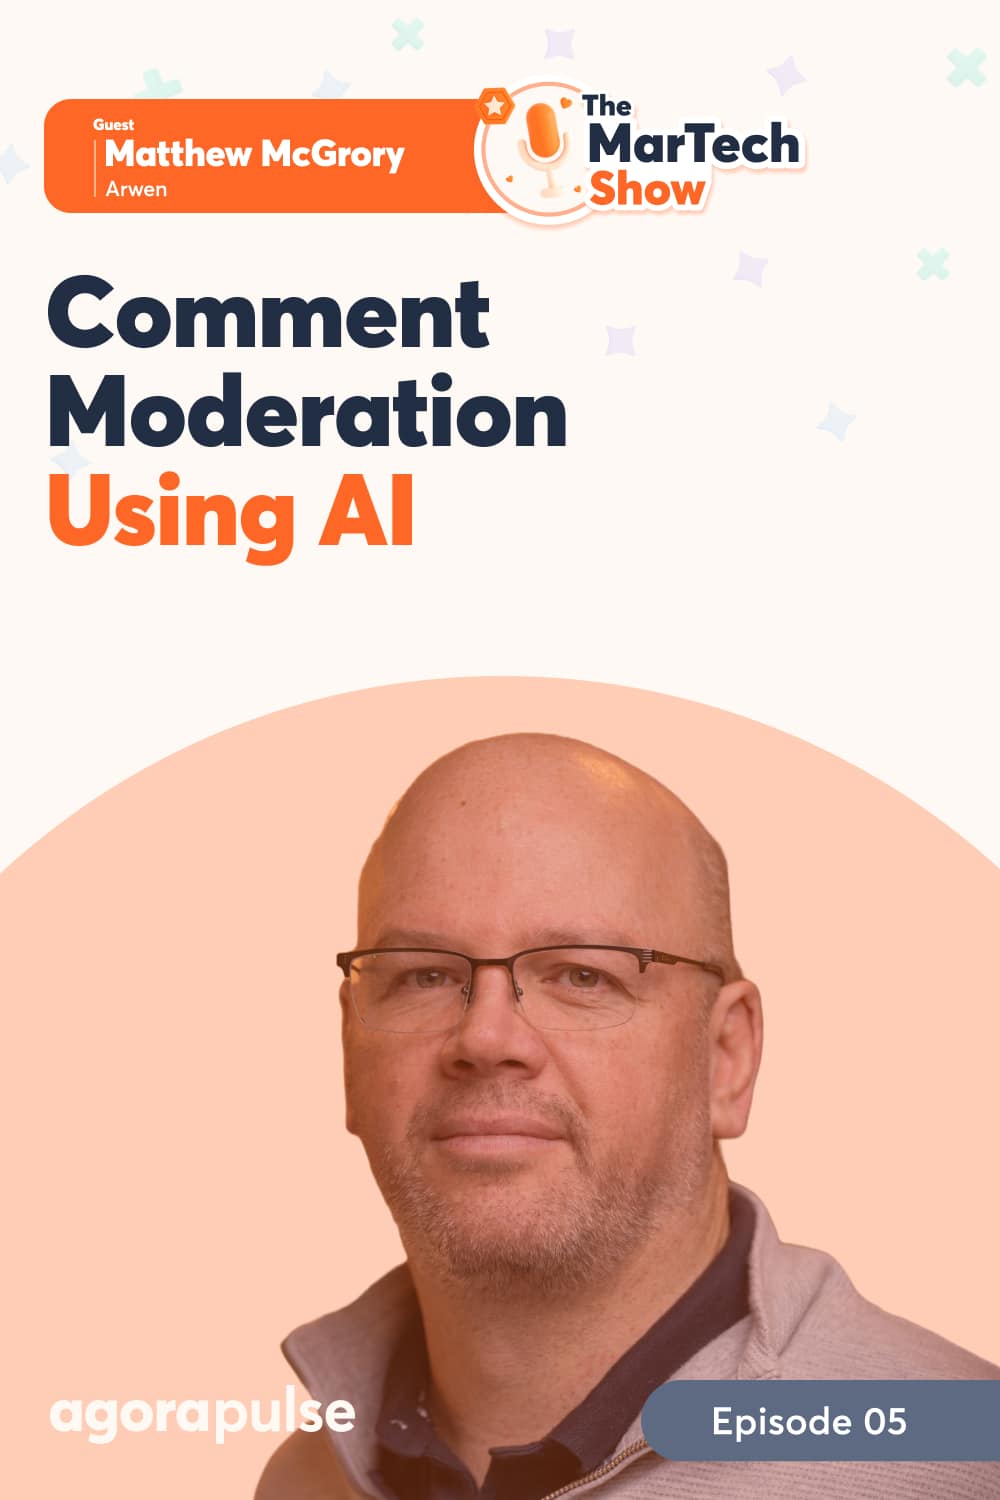 How to Streamline & Monetize Comment Moderation Using AI